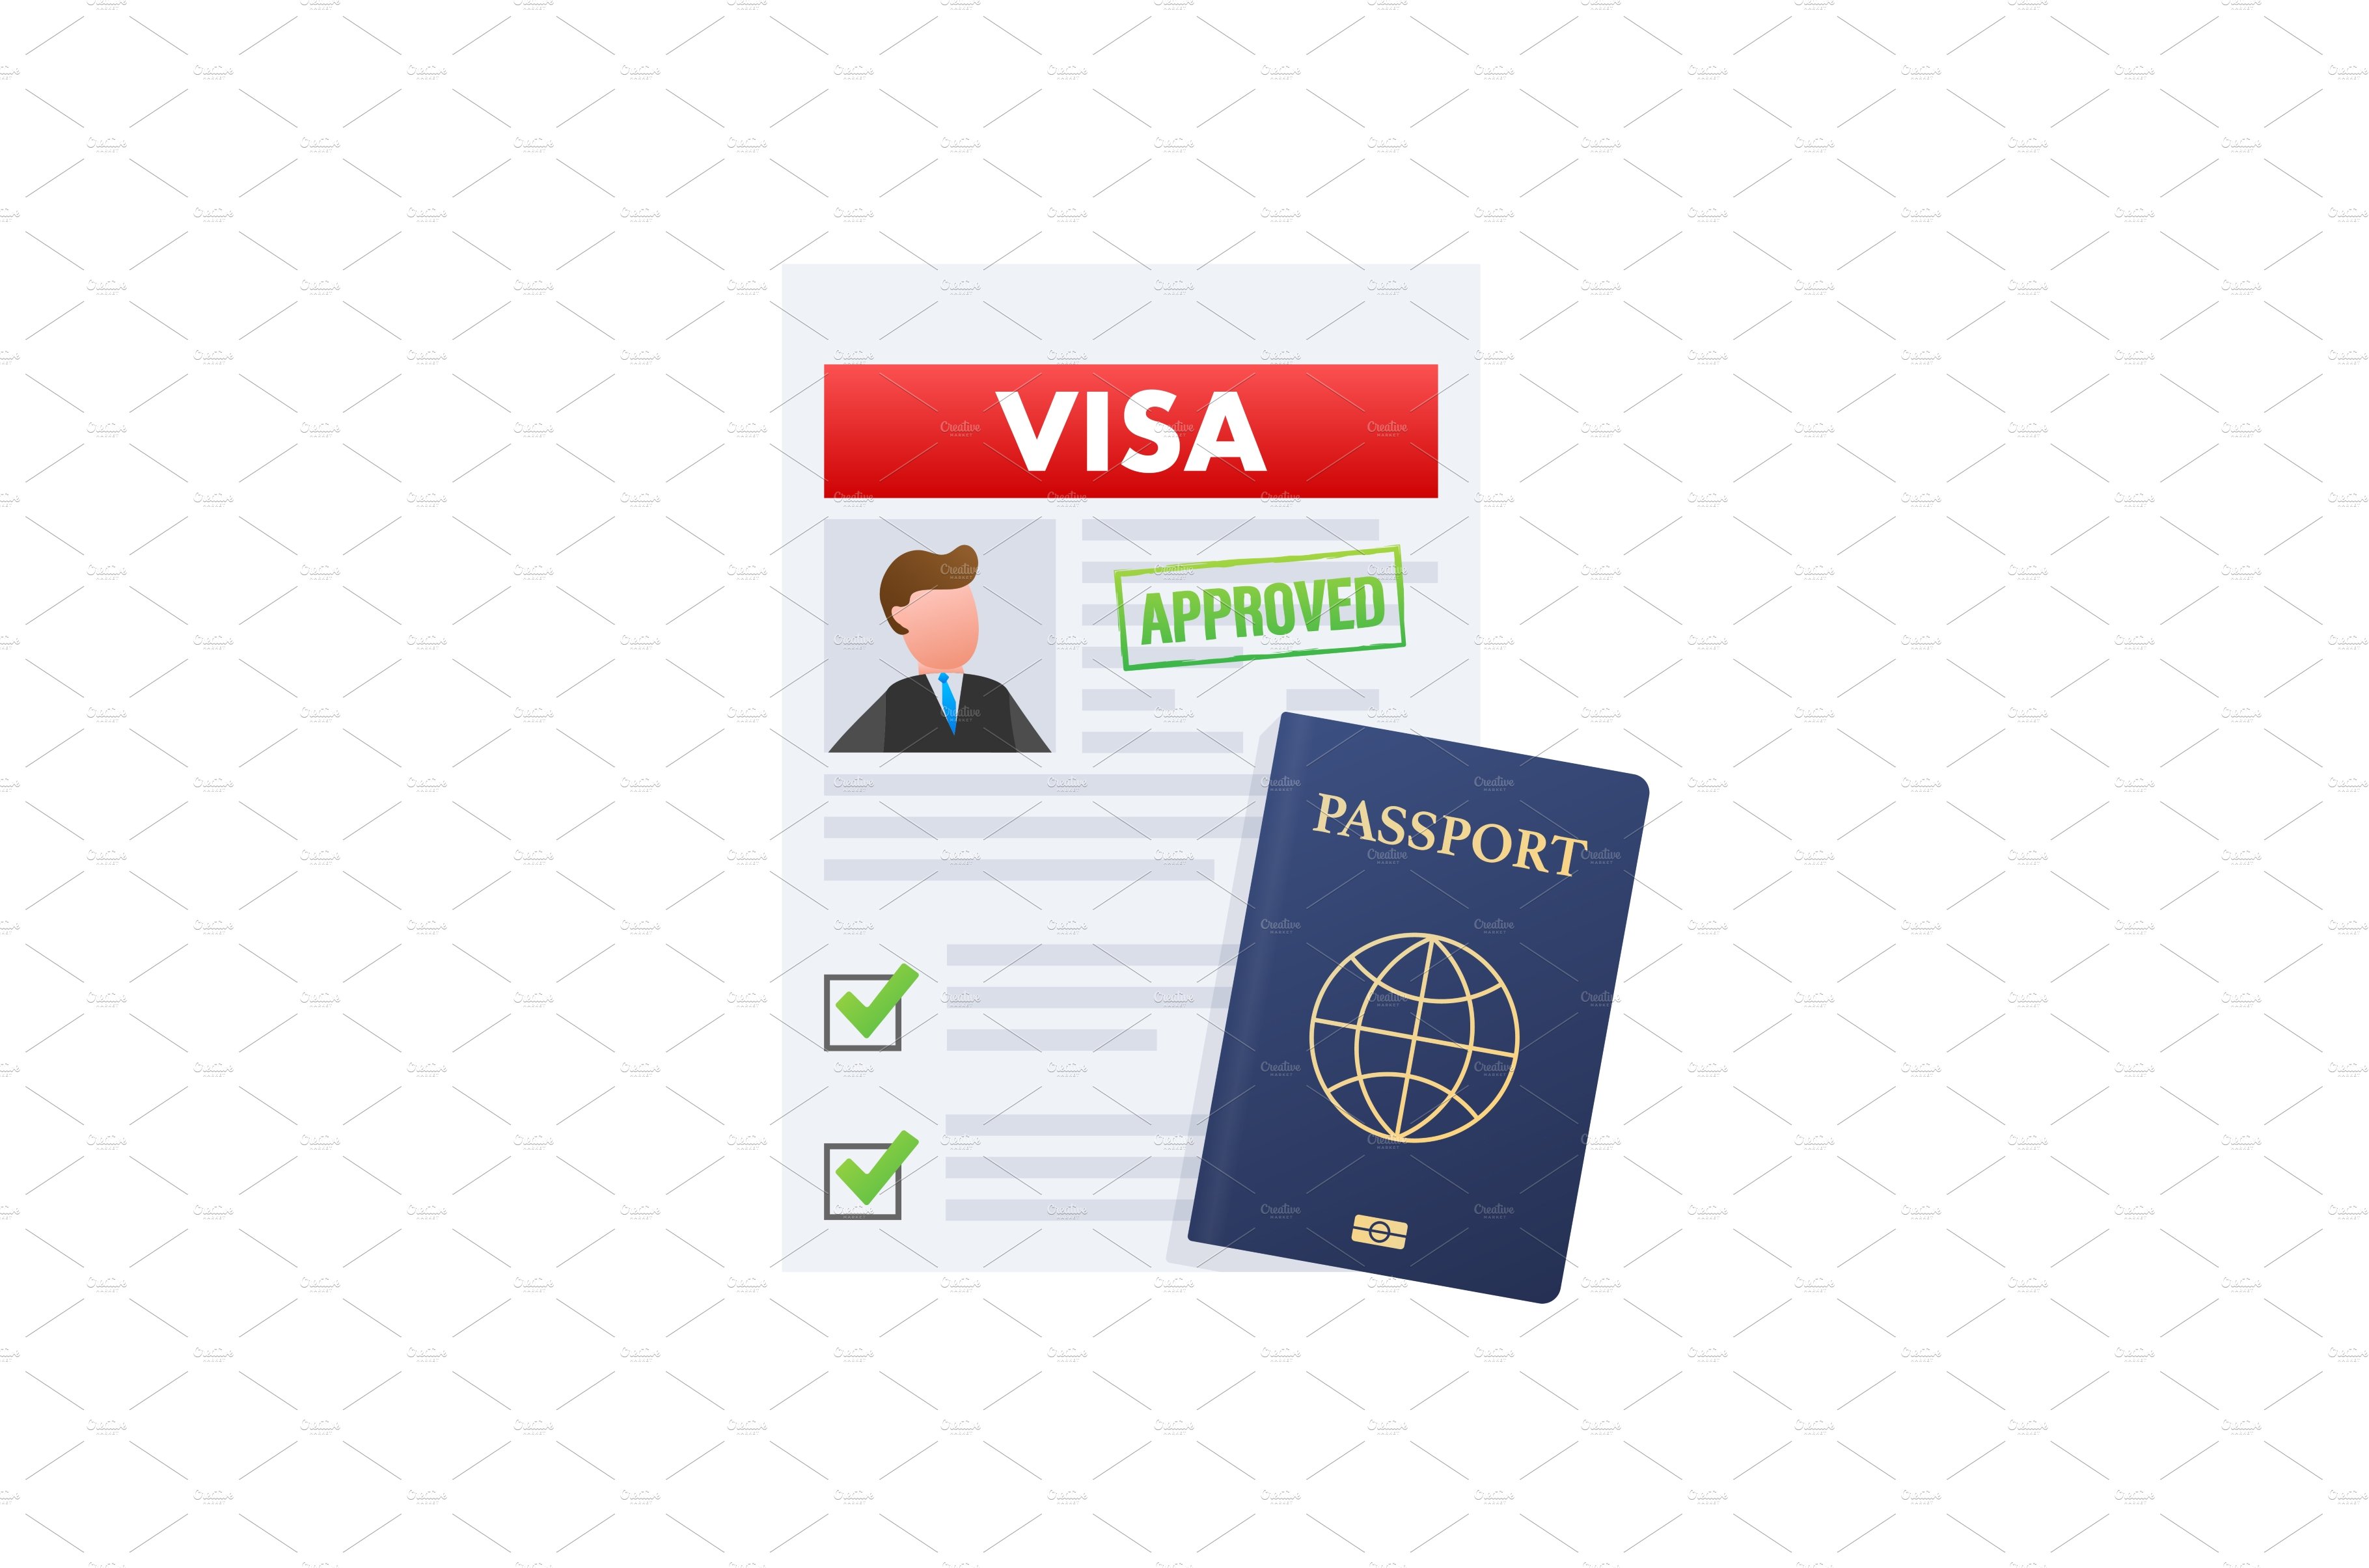 Visa application. Travel approval cover image.